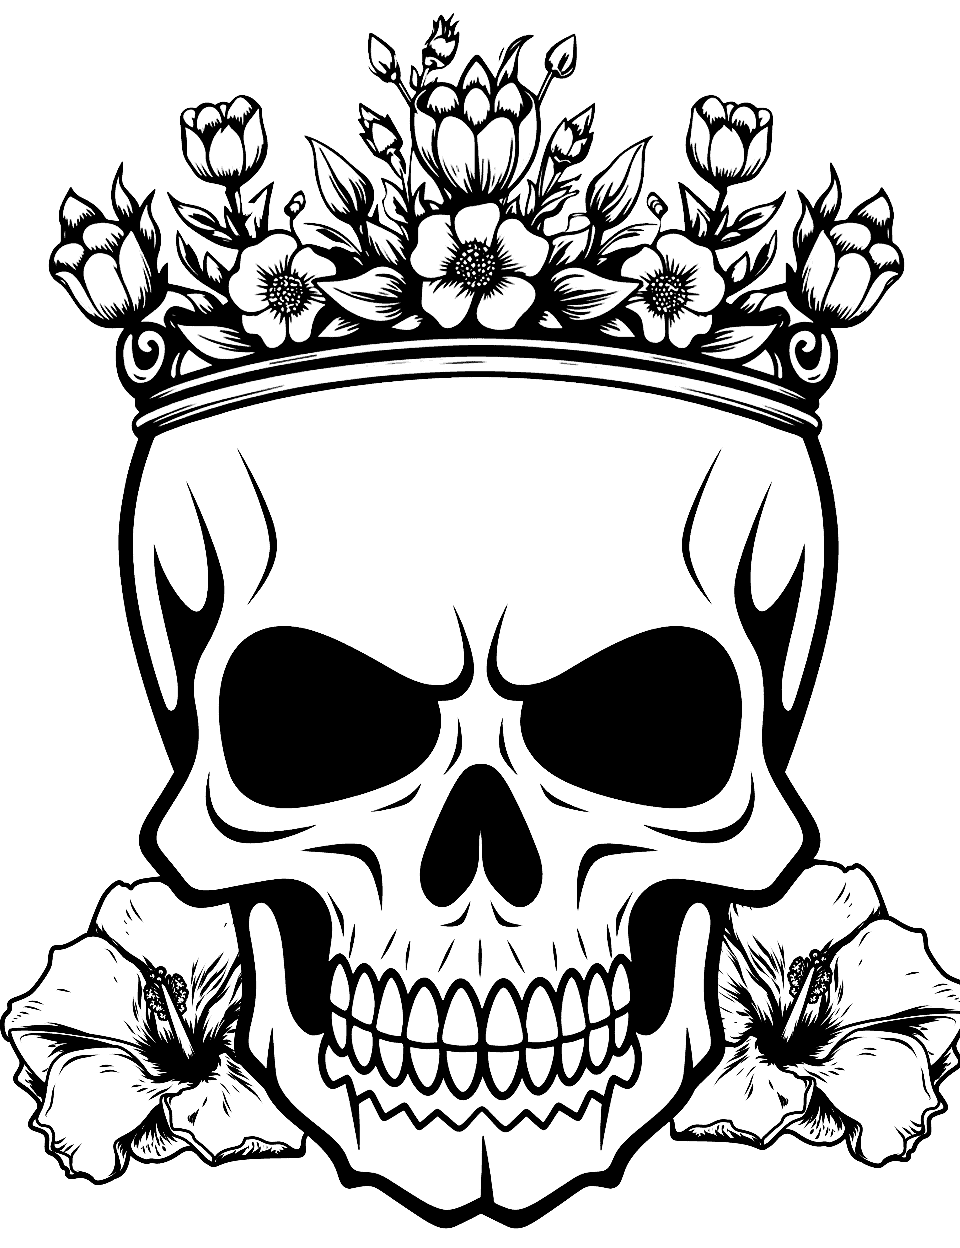 Skull with Flower Crown Coloring Page - A serene skull wearing a crown made of various flowers.